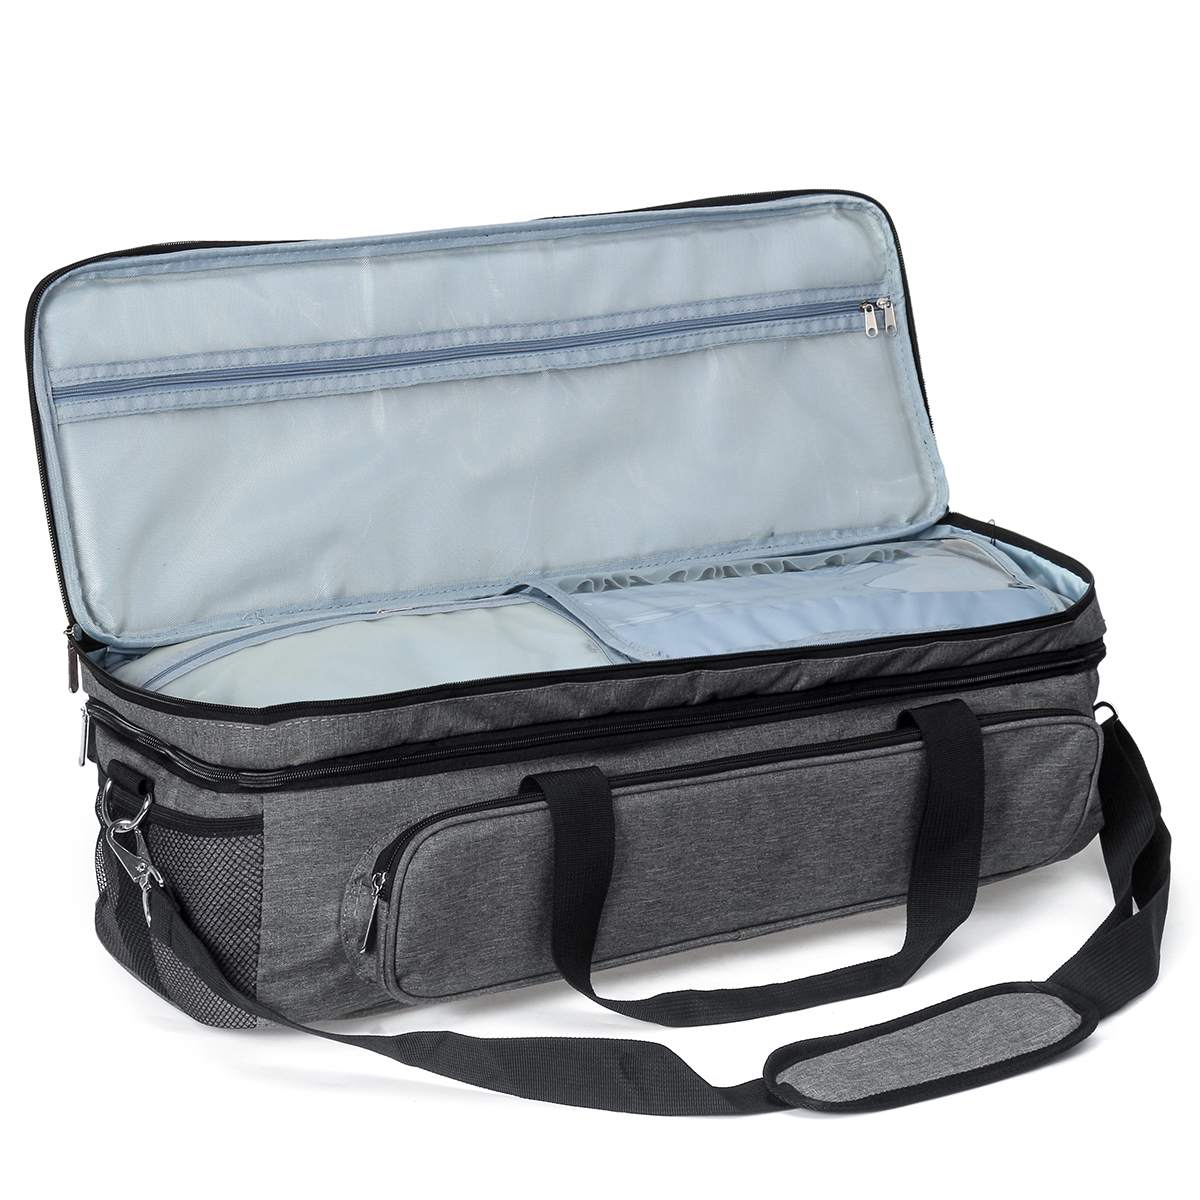 Portable-600D-Oxford-Cloth-Cutting-Machine-Carrying-Storage-Bag-Tool-Travel-Case-1618038-5